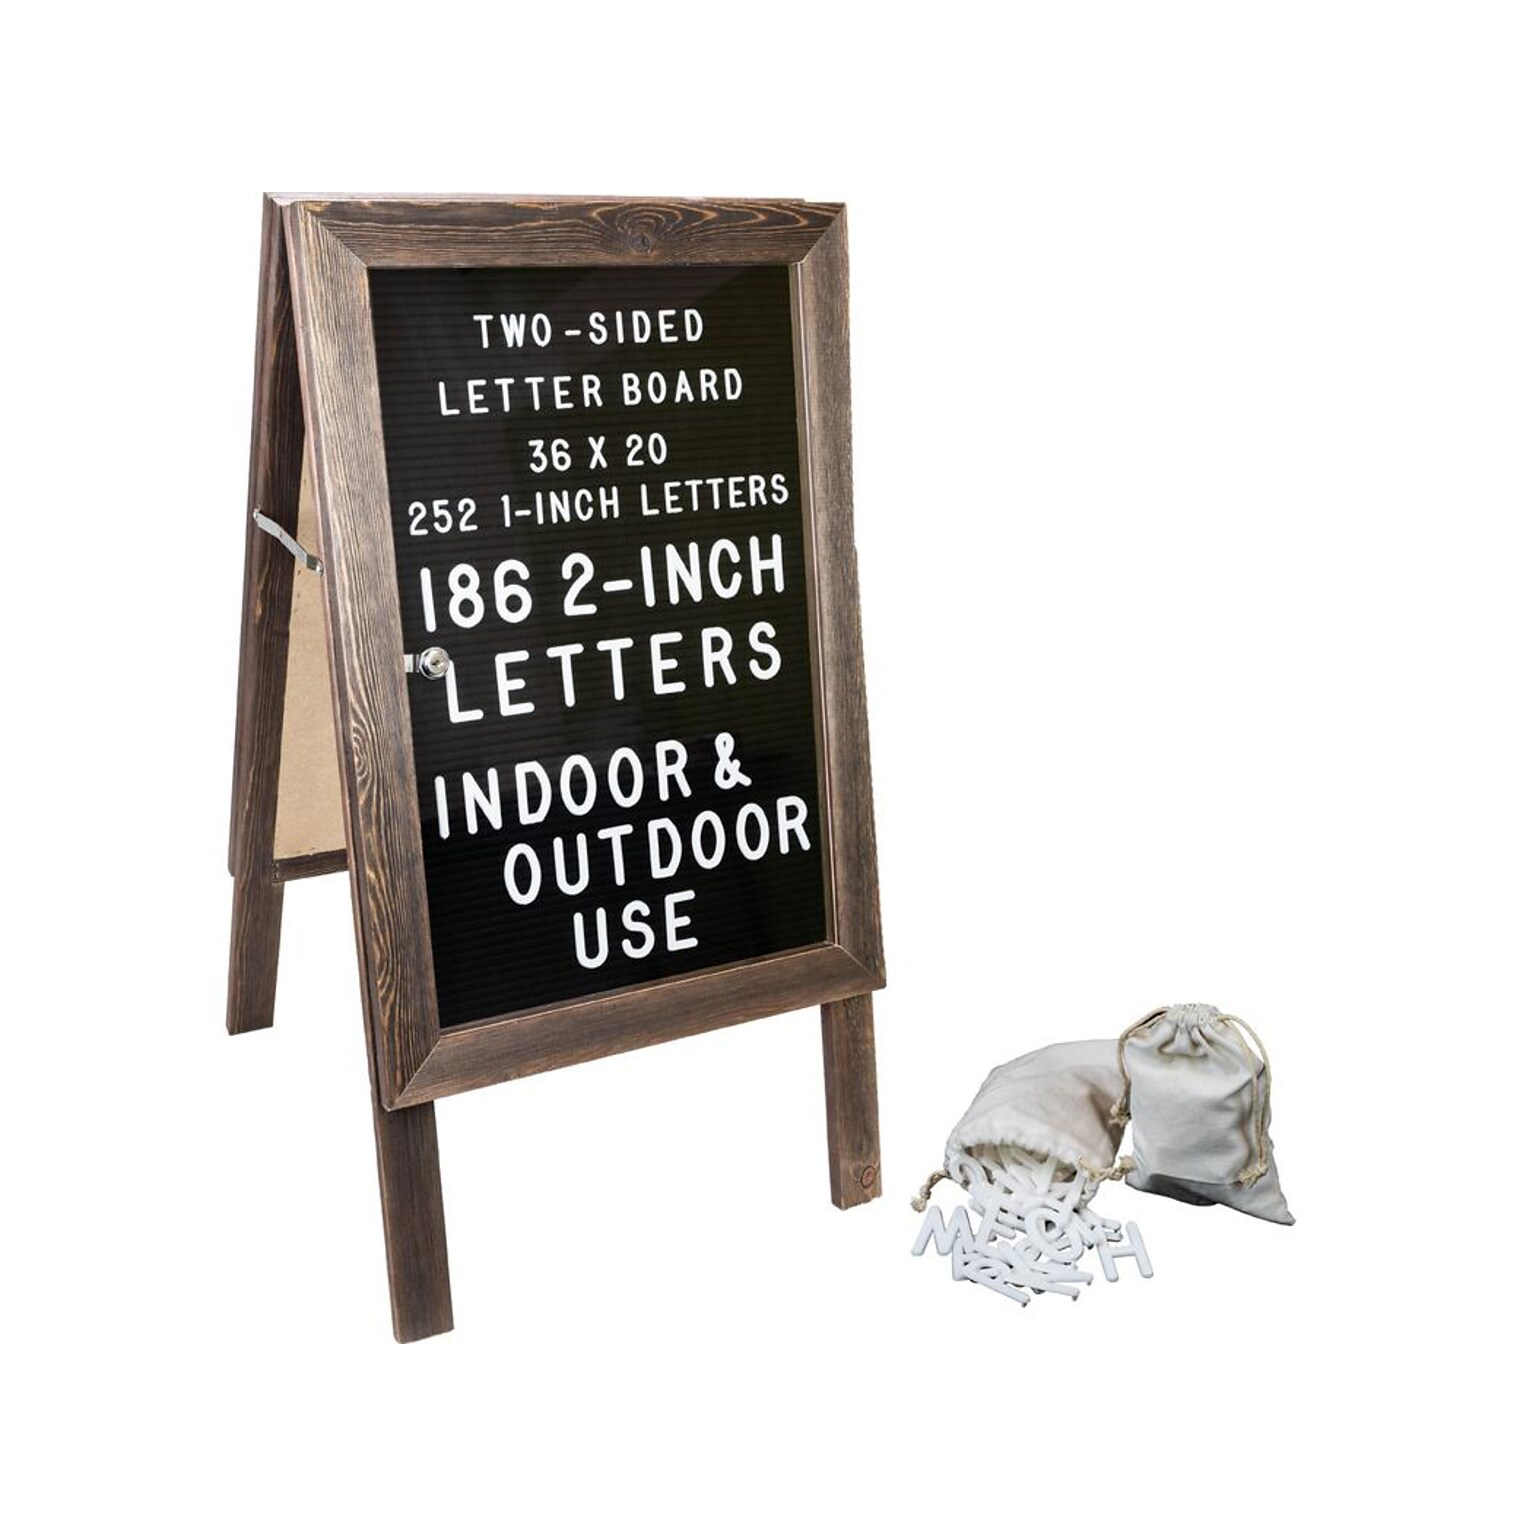 Excello Global Products Changeable Message Indoor/Outdoor Sidewalk Sign, 20 x 36, Black/Wood (EGP-HD-0084)